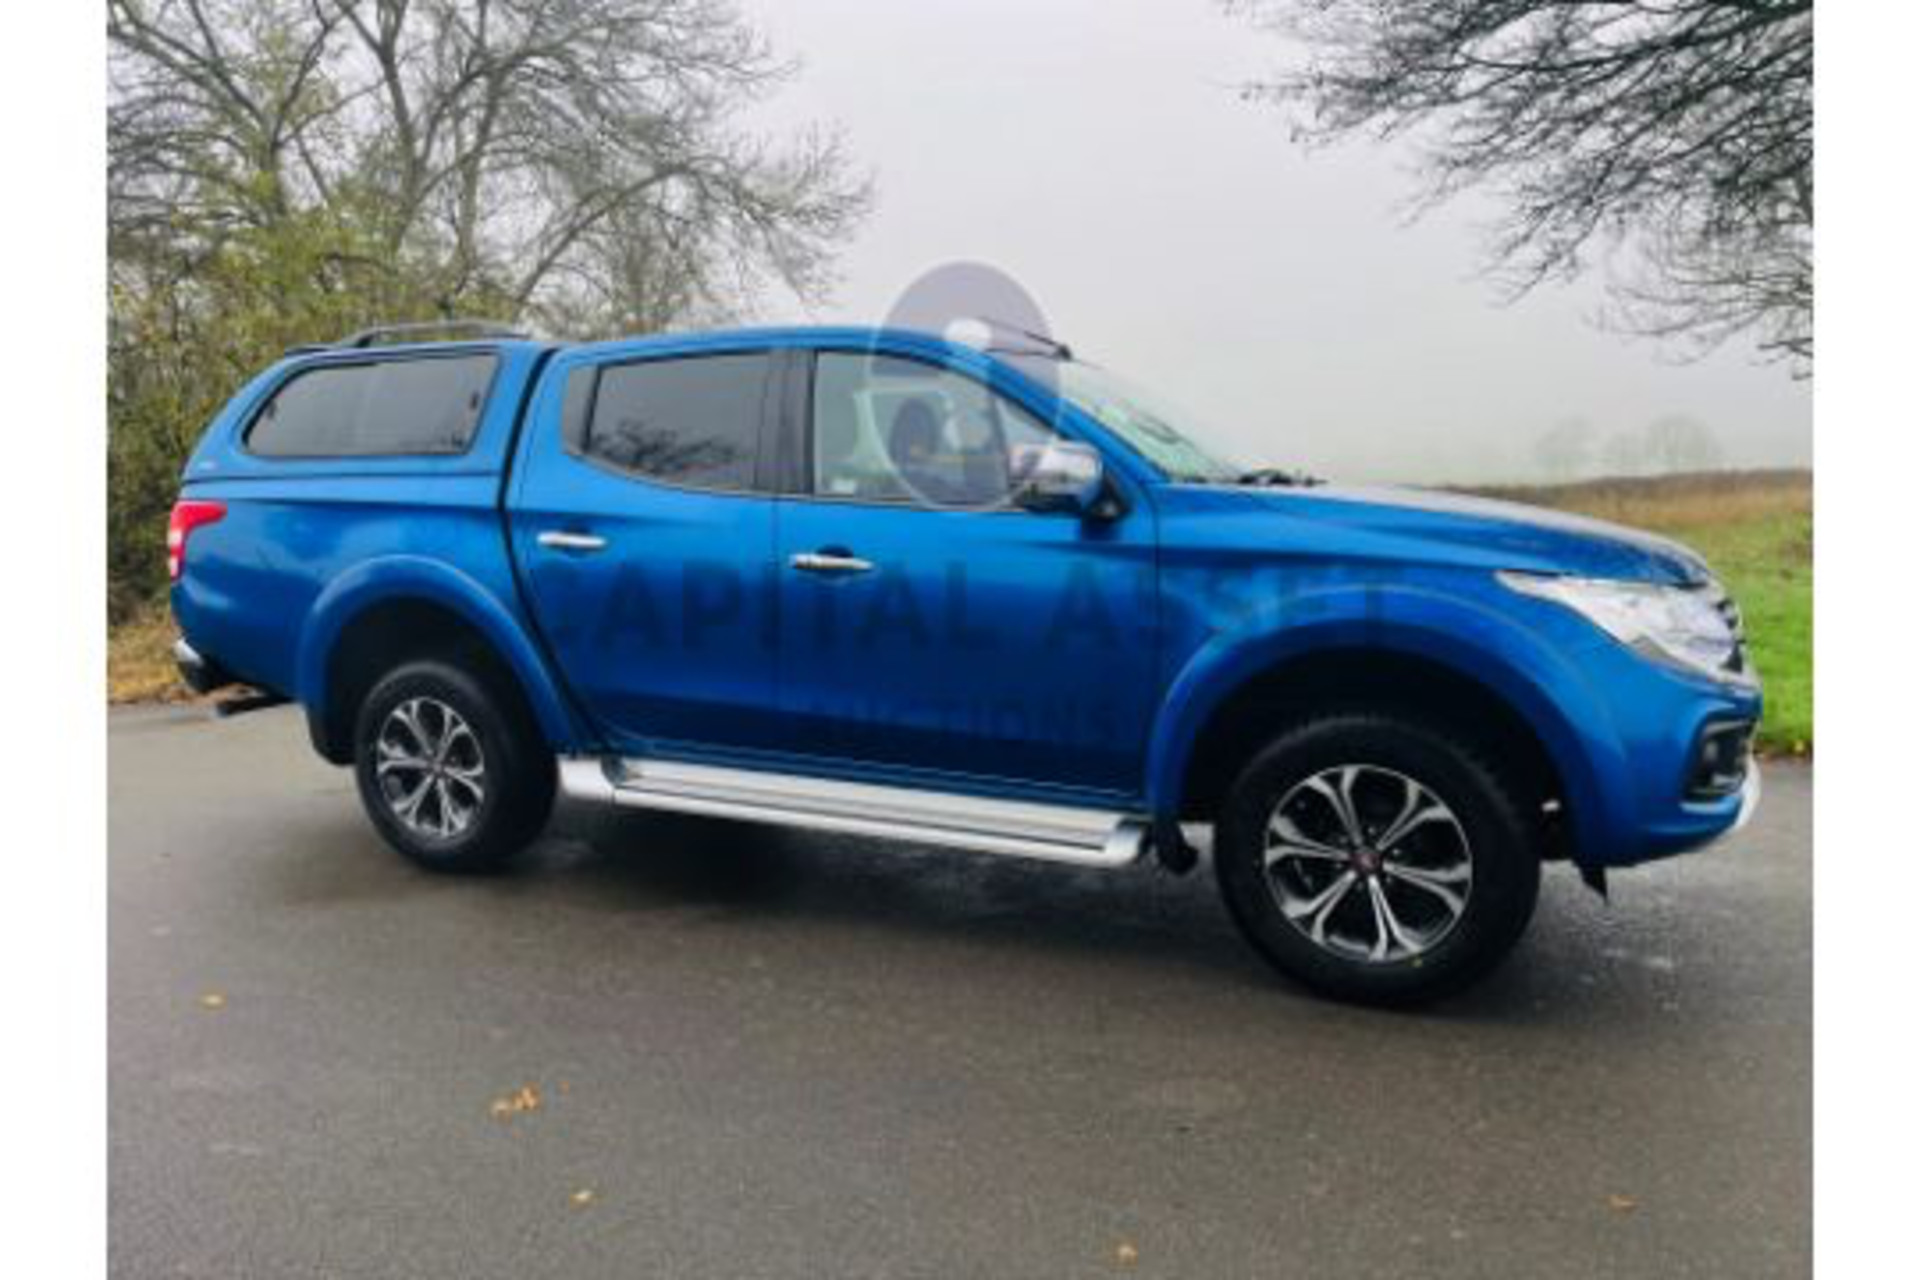 (ON SALE) FIAT FULLBACK 2.4DI-D "AUTOMATIC" LX D/CAB 4X4 PICK UP - 2018 REG - 1 OWNER - LEATHER - - Image 7 of 32